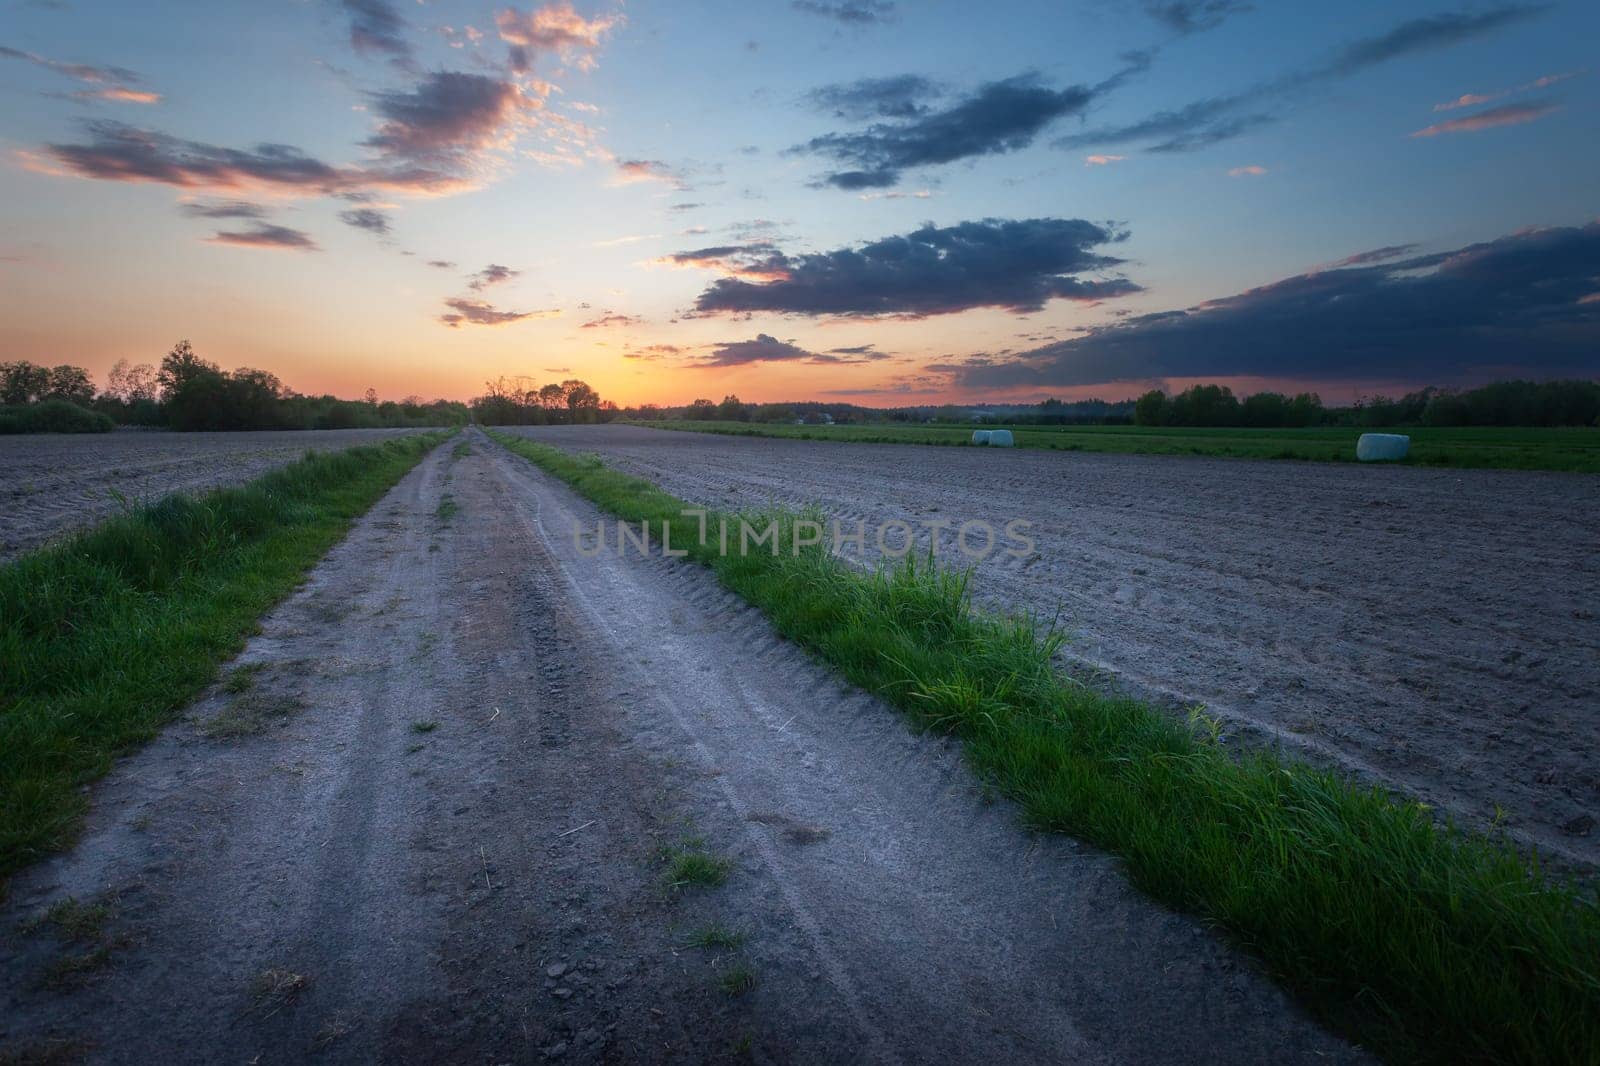 Dirt road and plowed fields with evening sky, view on a spring day by darekb22